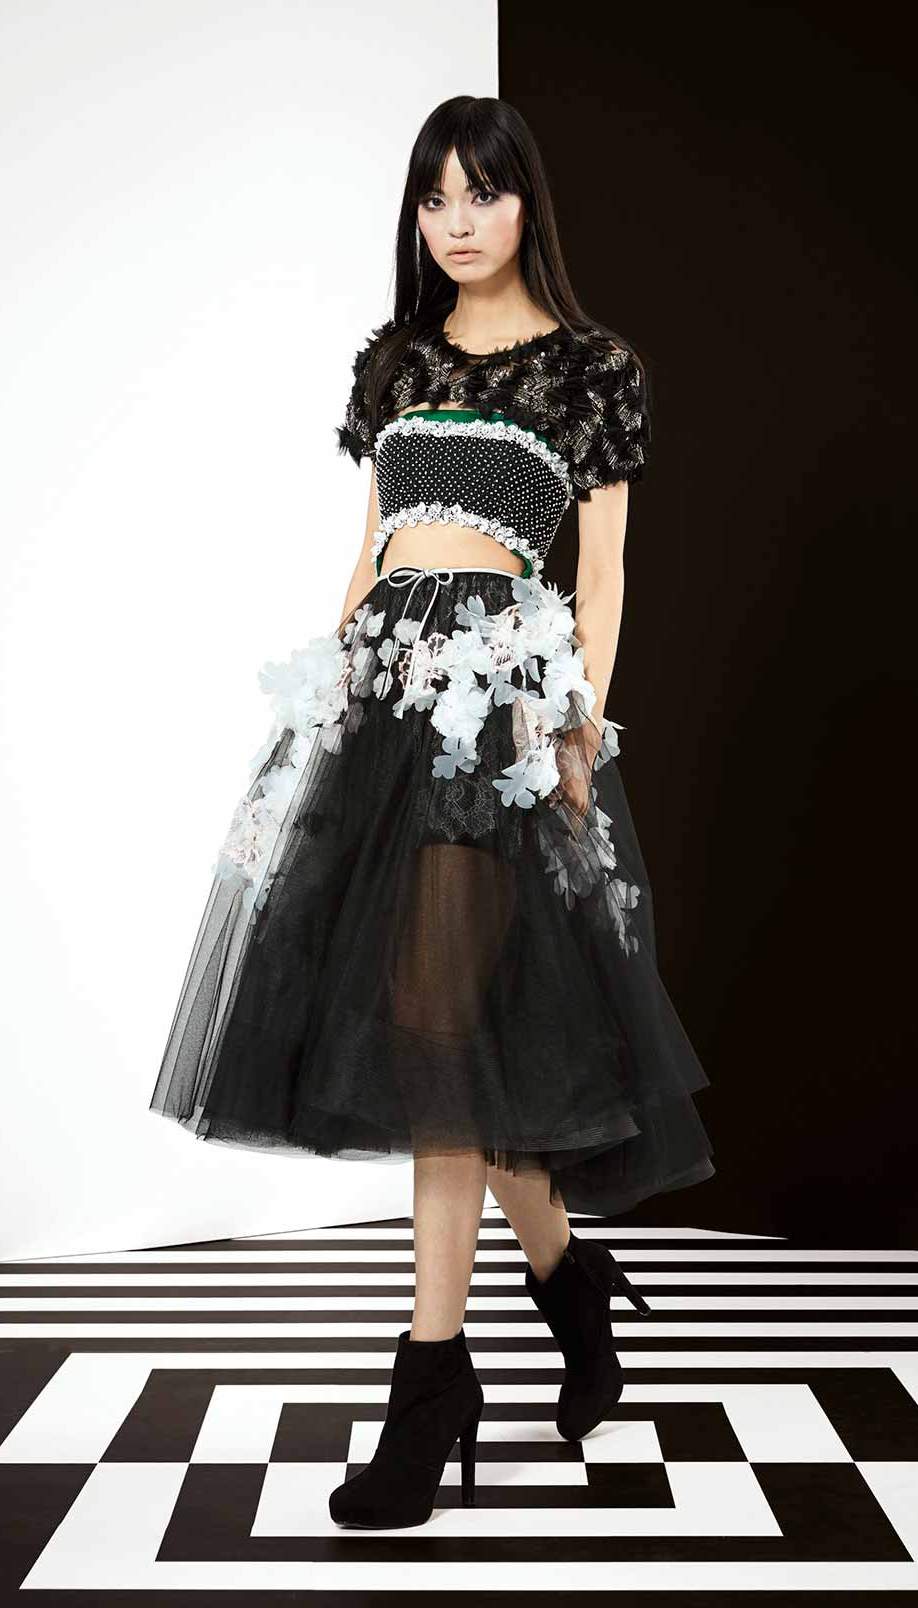 3-piece couture ensemble. Shoulder-top made of handmade jet and silver appliques